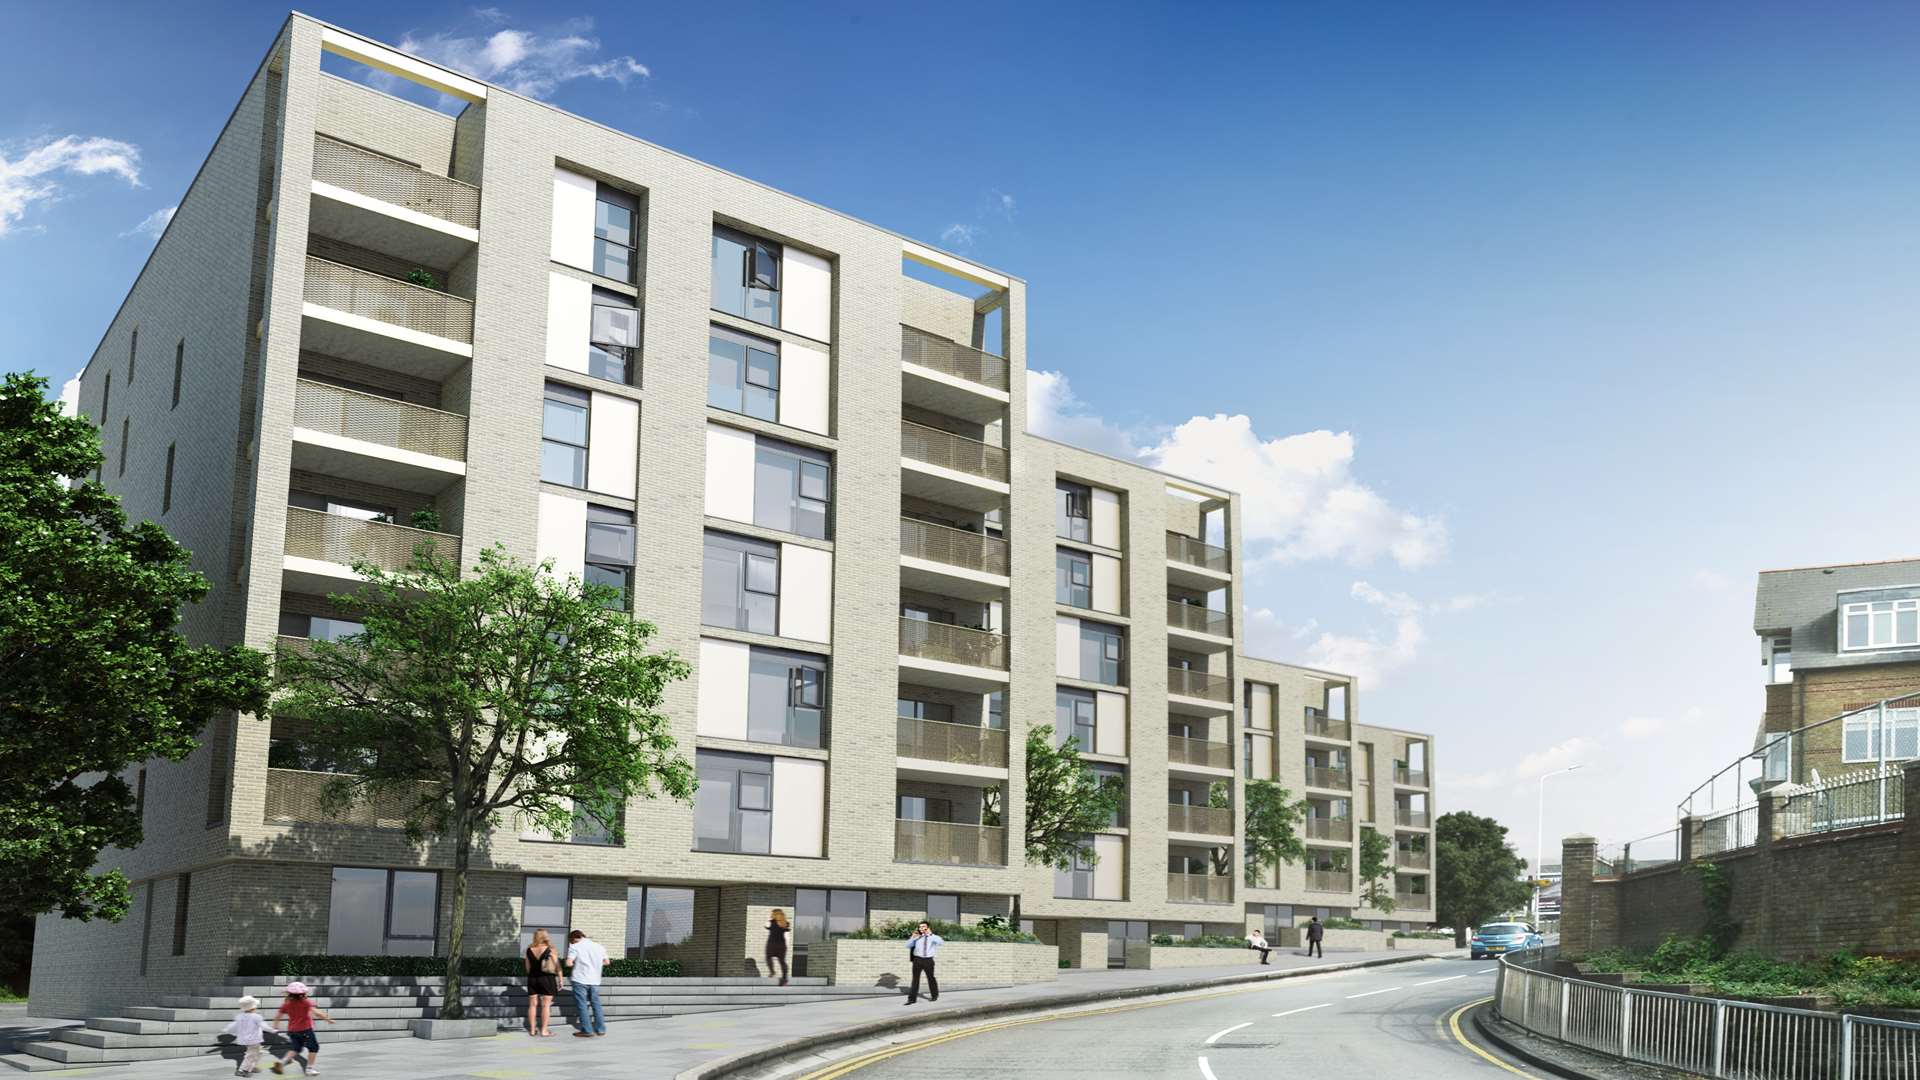 New homes will be built on Spring Street car park